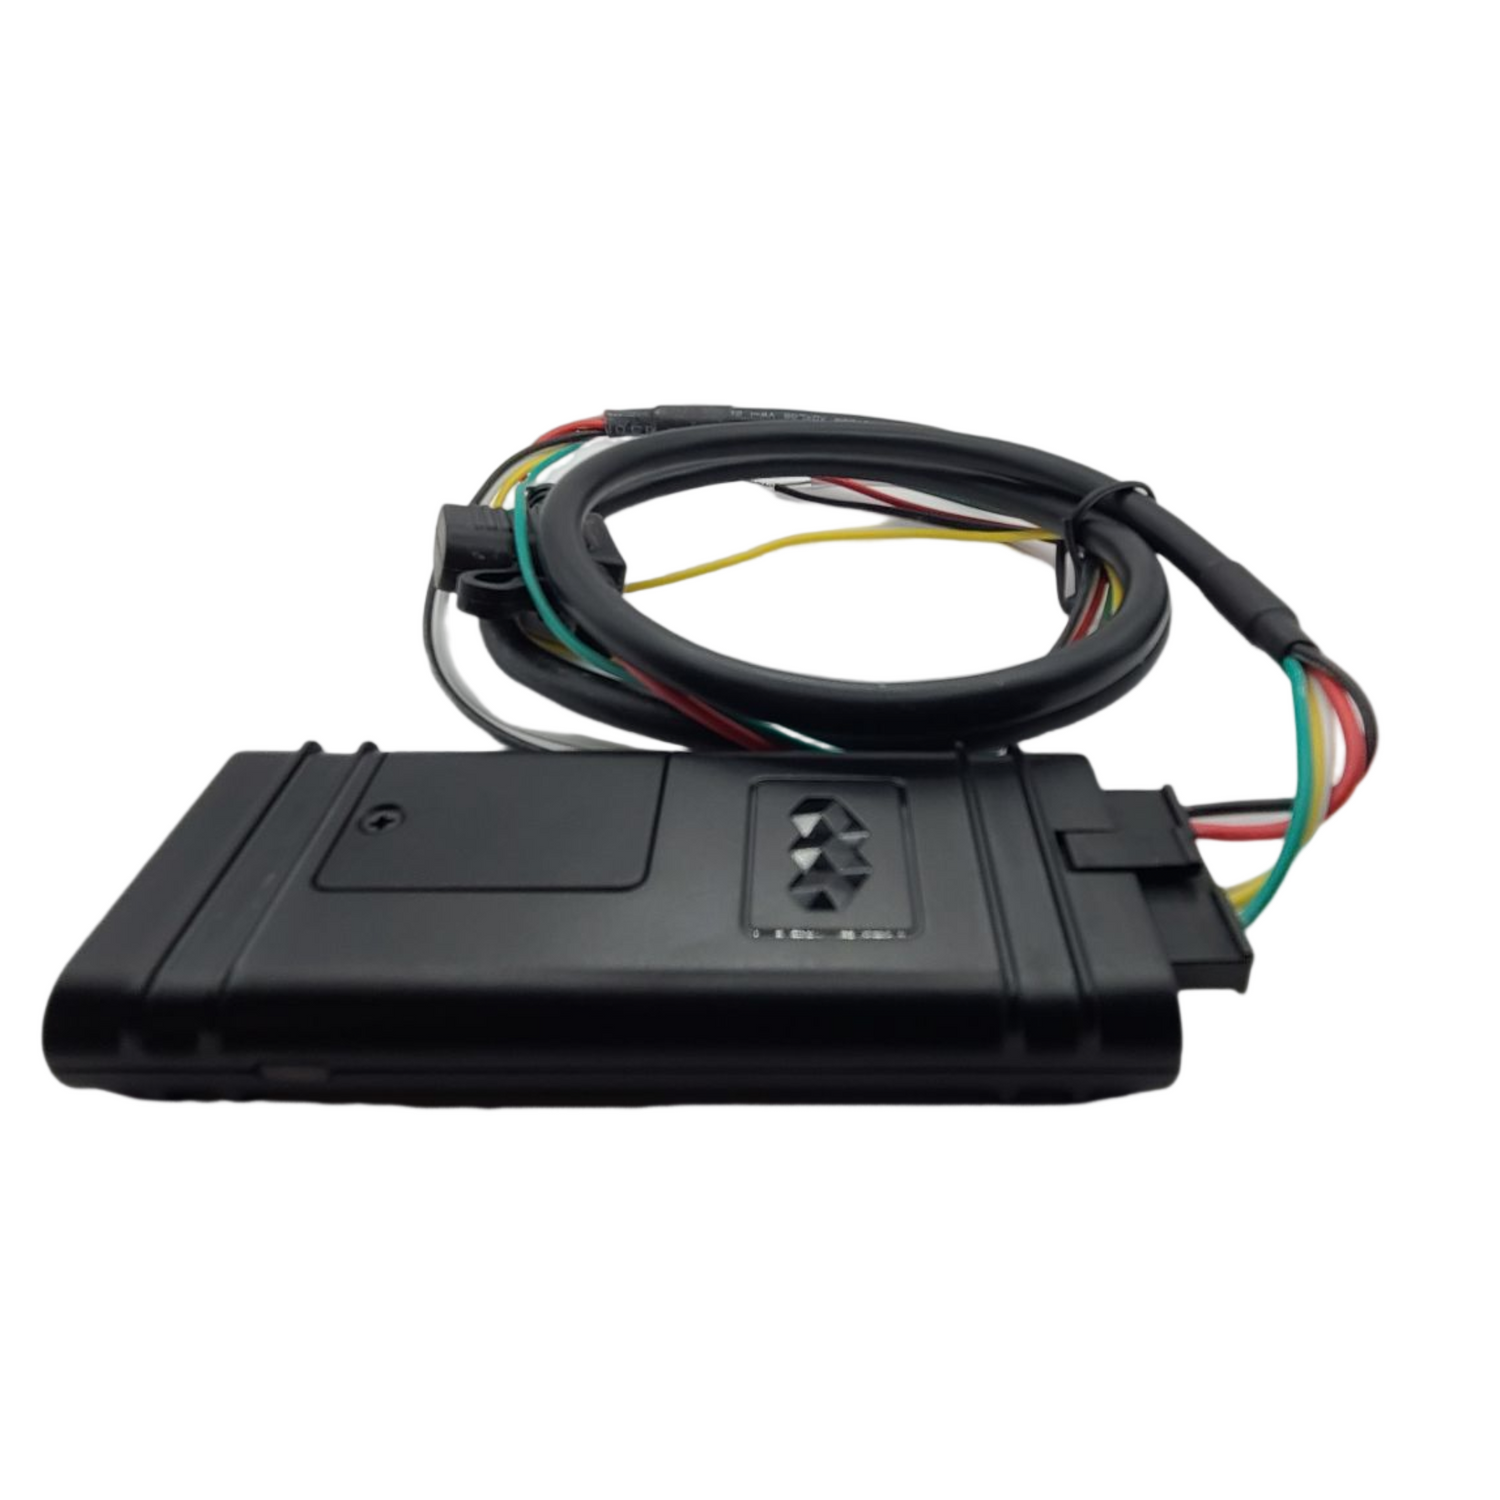 Product image of The EVO, a hardwired GPS tracker with starter kill relay provided by Advantage and On Demand Tracking